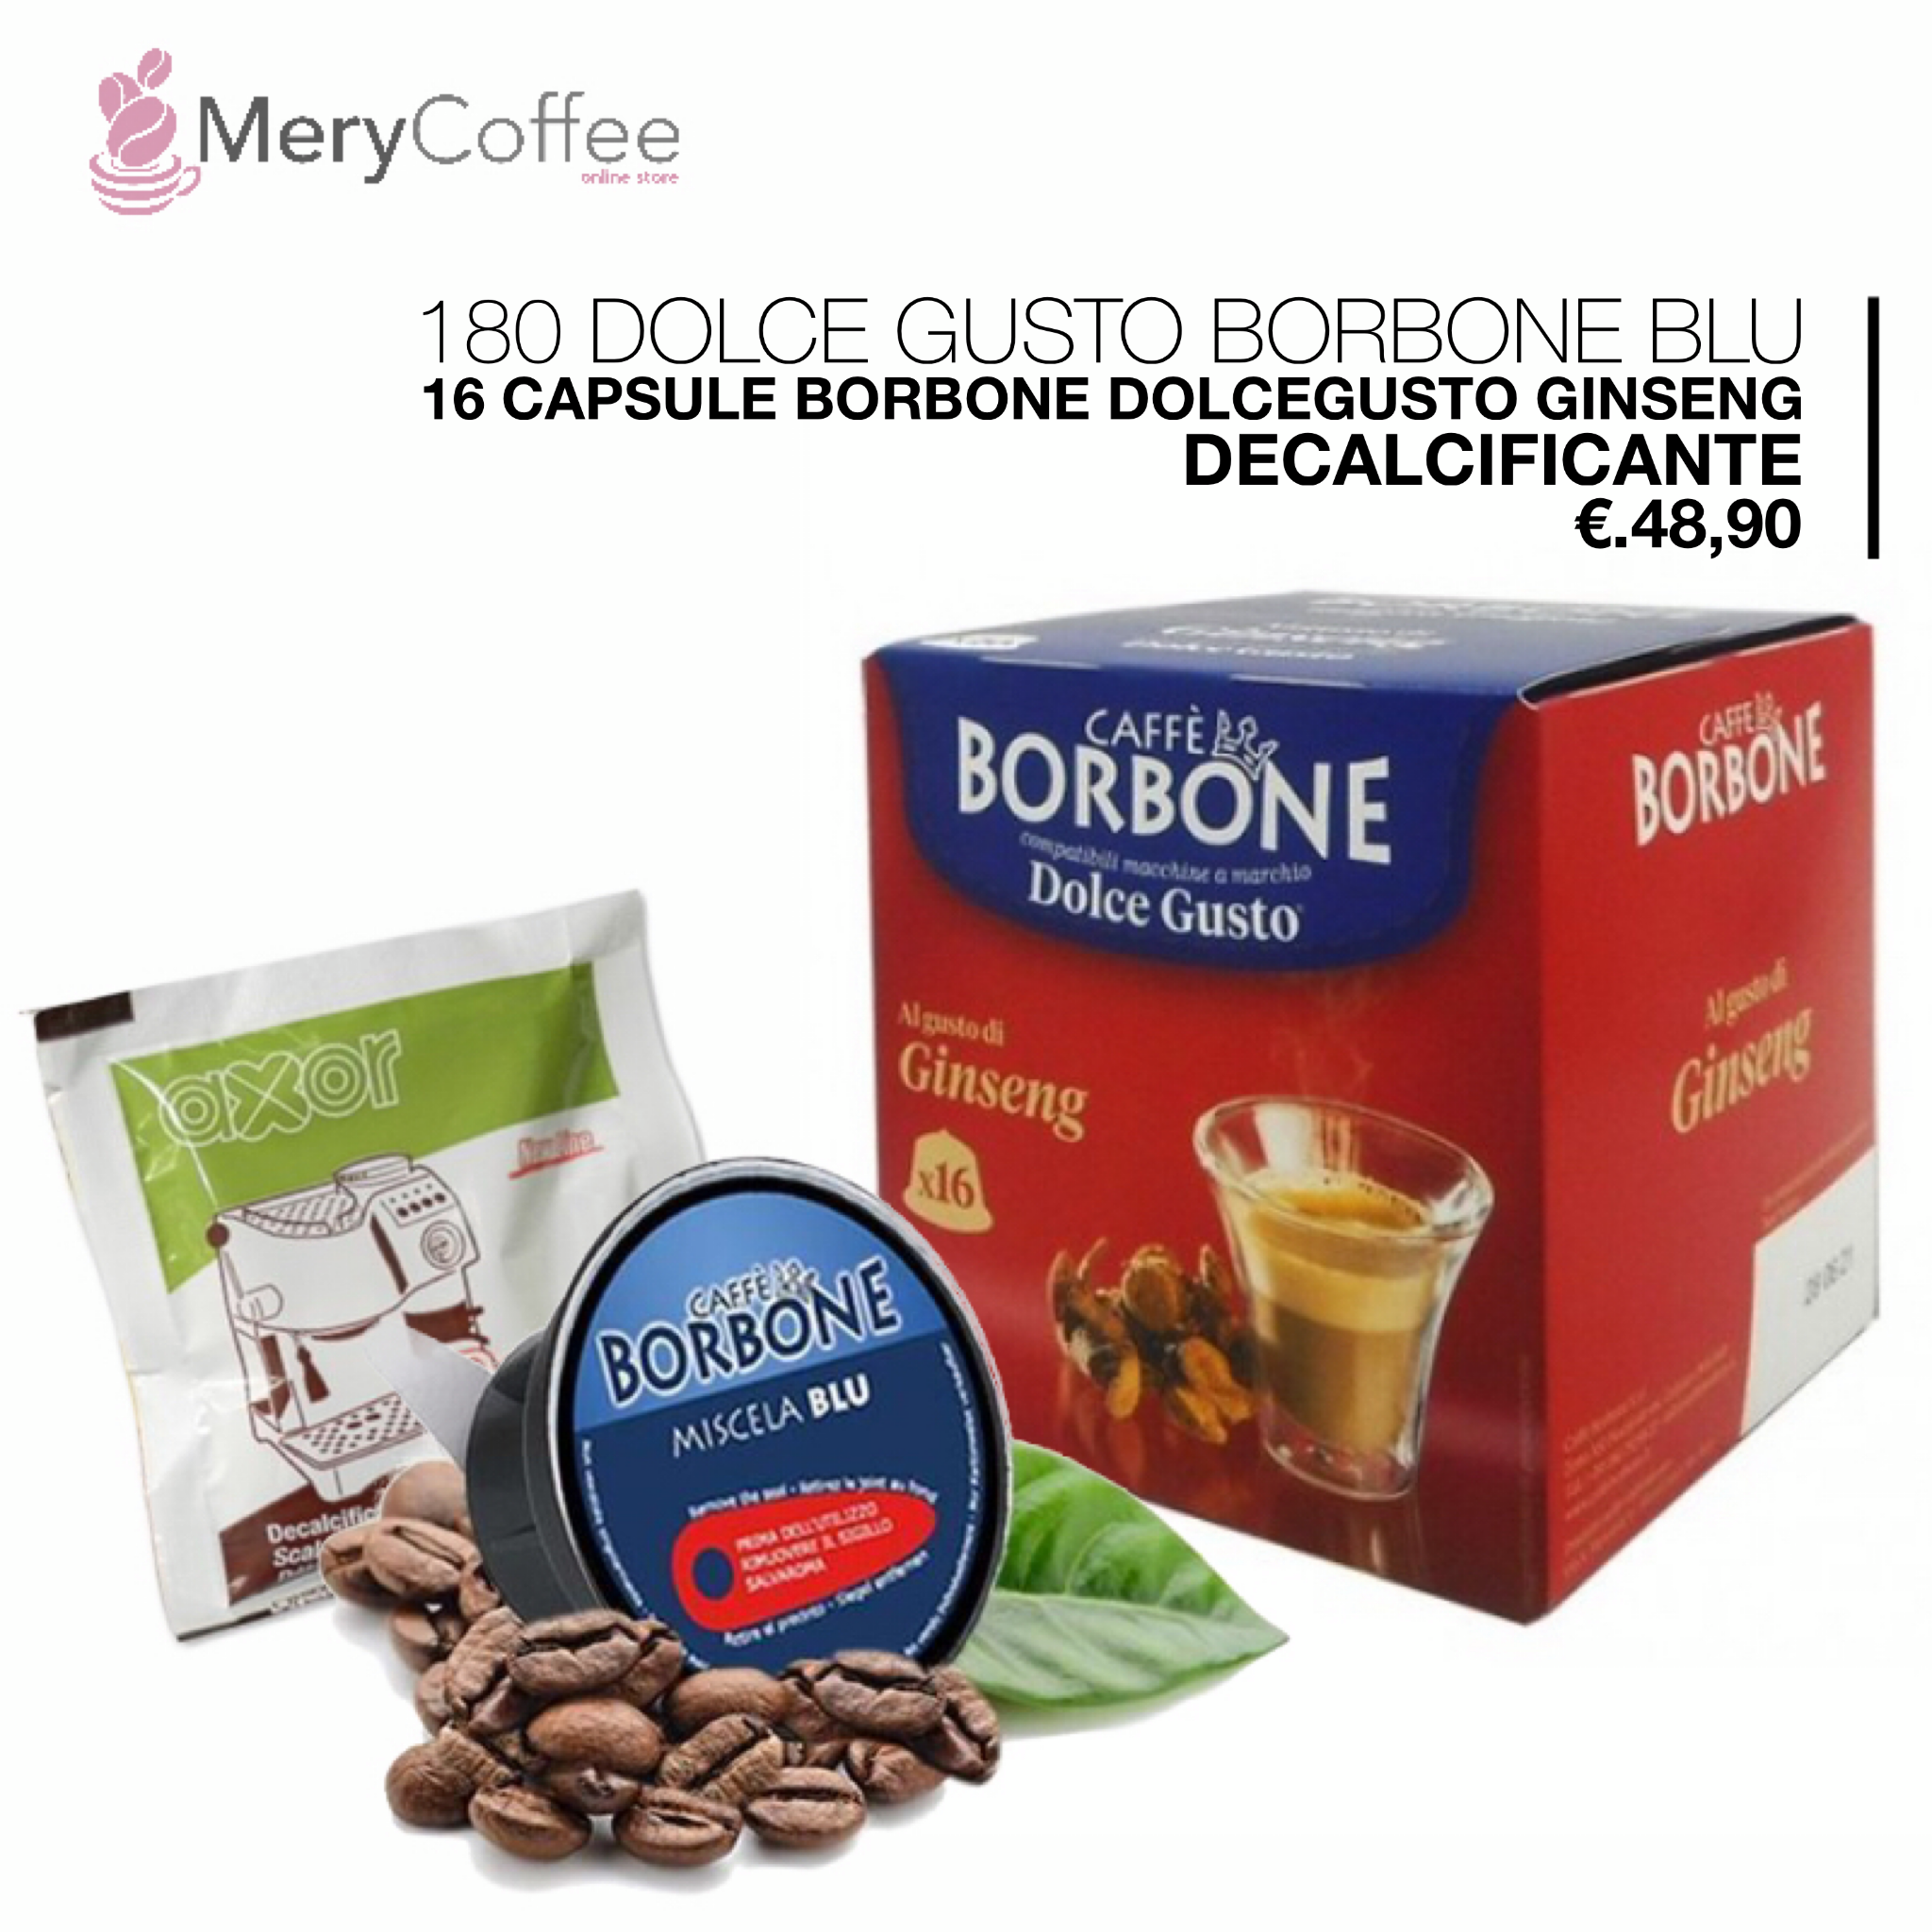 180 dolce gusto borbone blu+ 16 capsule borbone dolcegusto ginseng +  decalcificante - MeryCoffee